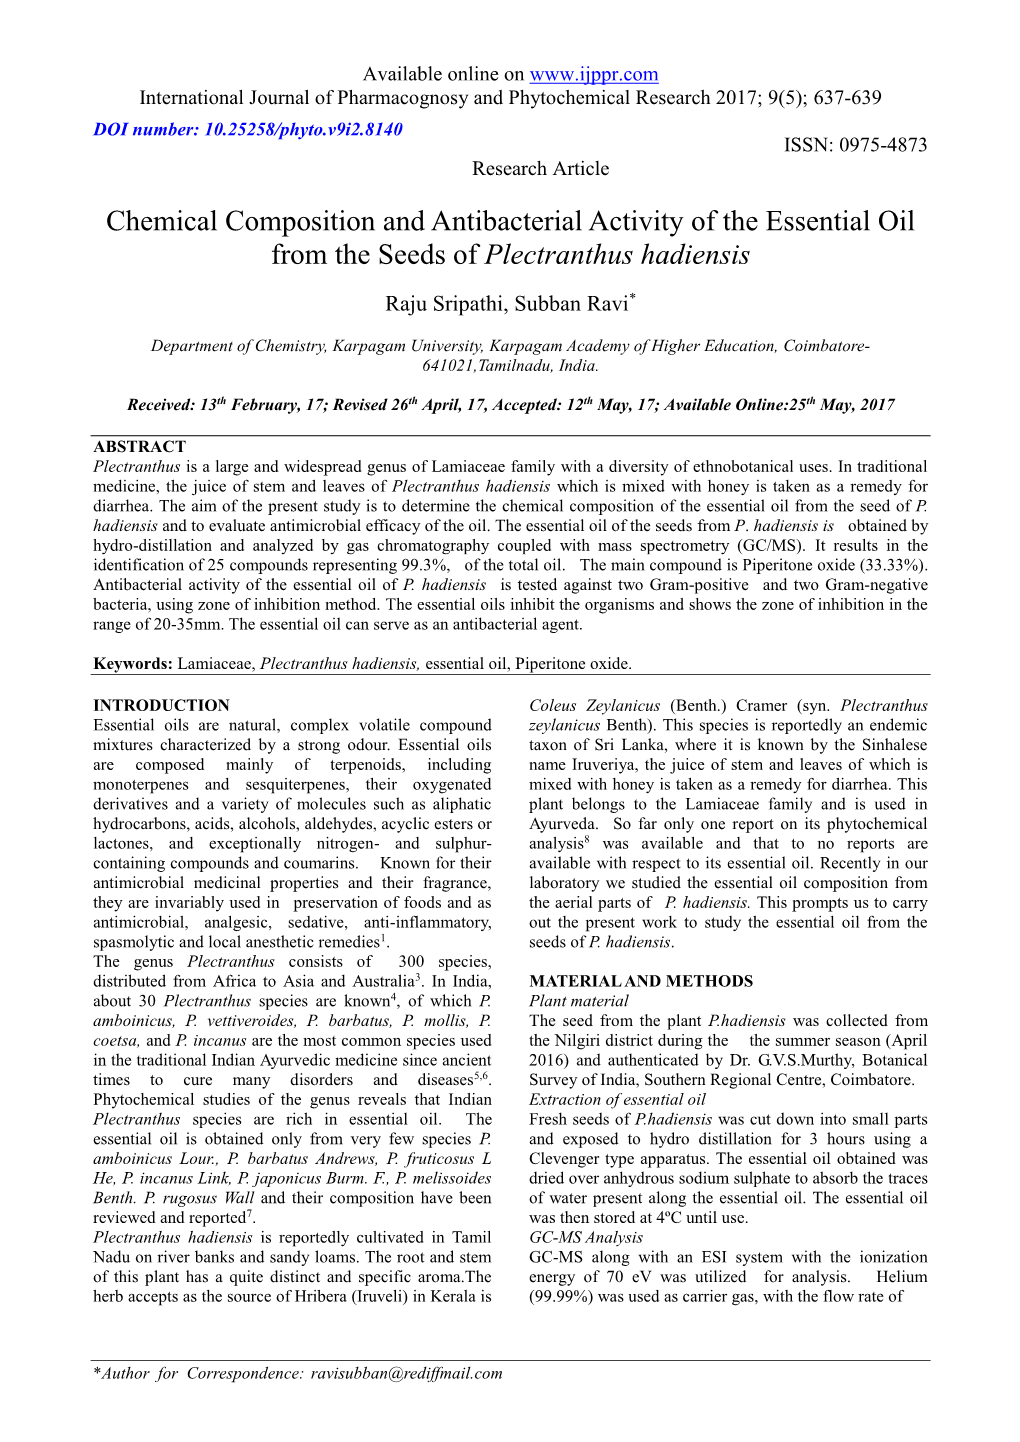 Chemical Composition and Antibacterial Activity of the Essential Oil from the Seeds of Plectranthus Hadiensis